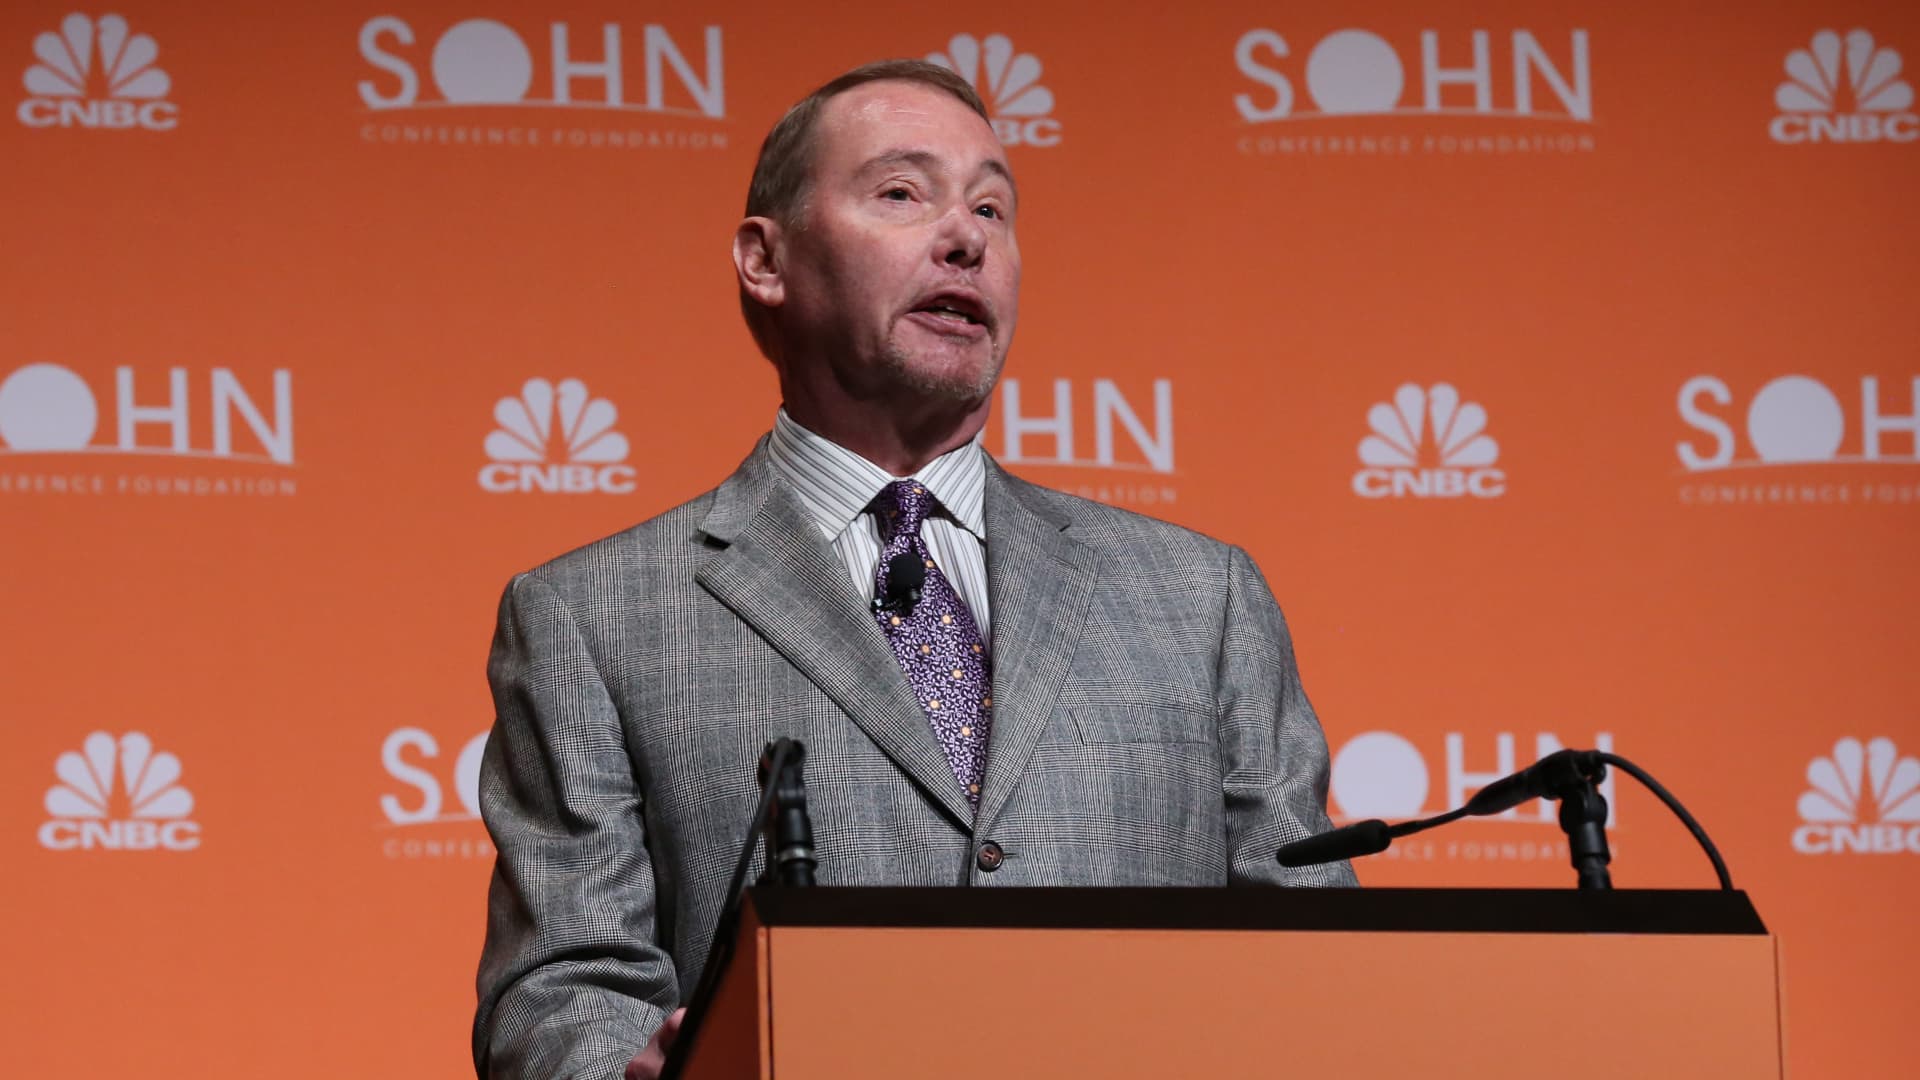 DoubleLine’s Gundlach says chance of more rate hikes is higher due to 'problematic' oil spike